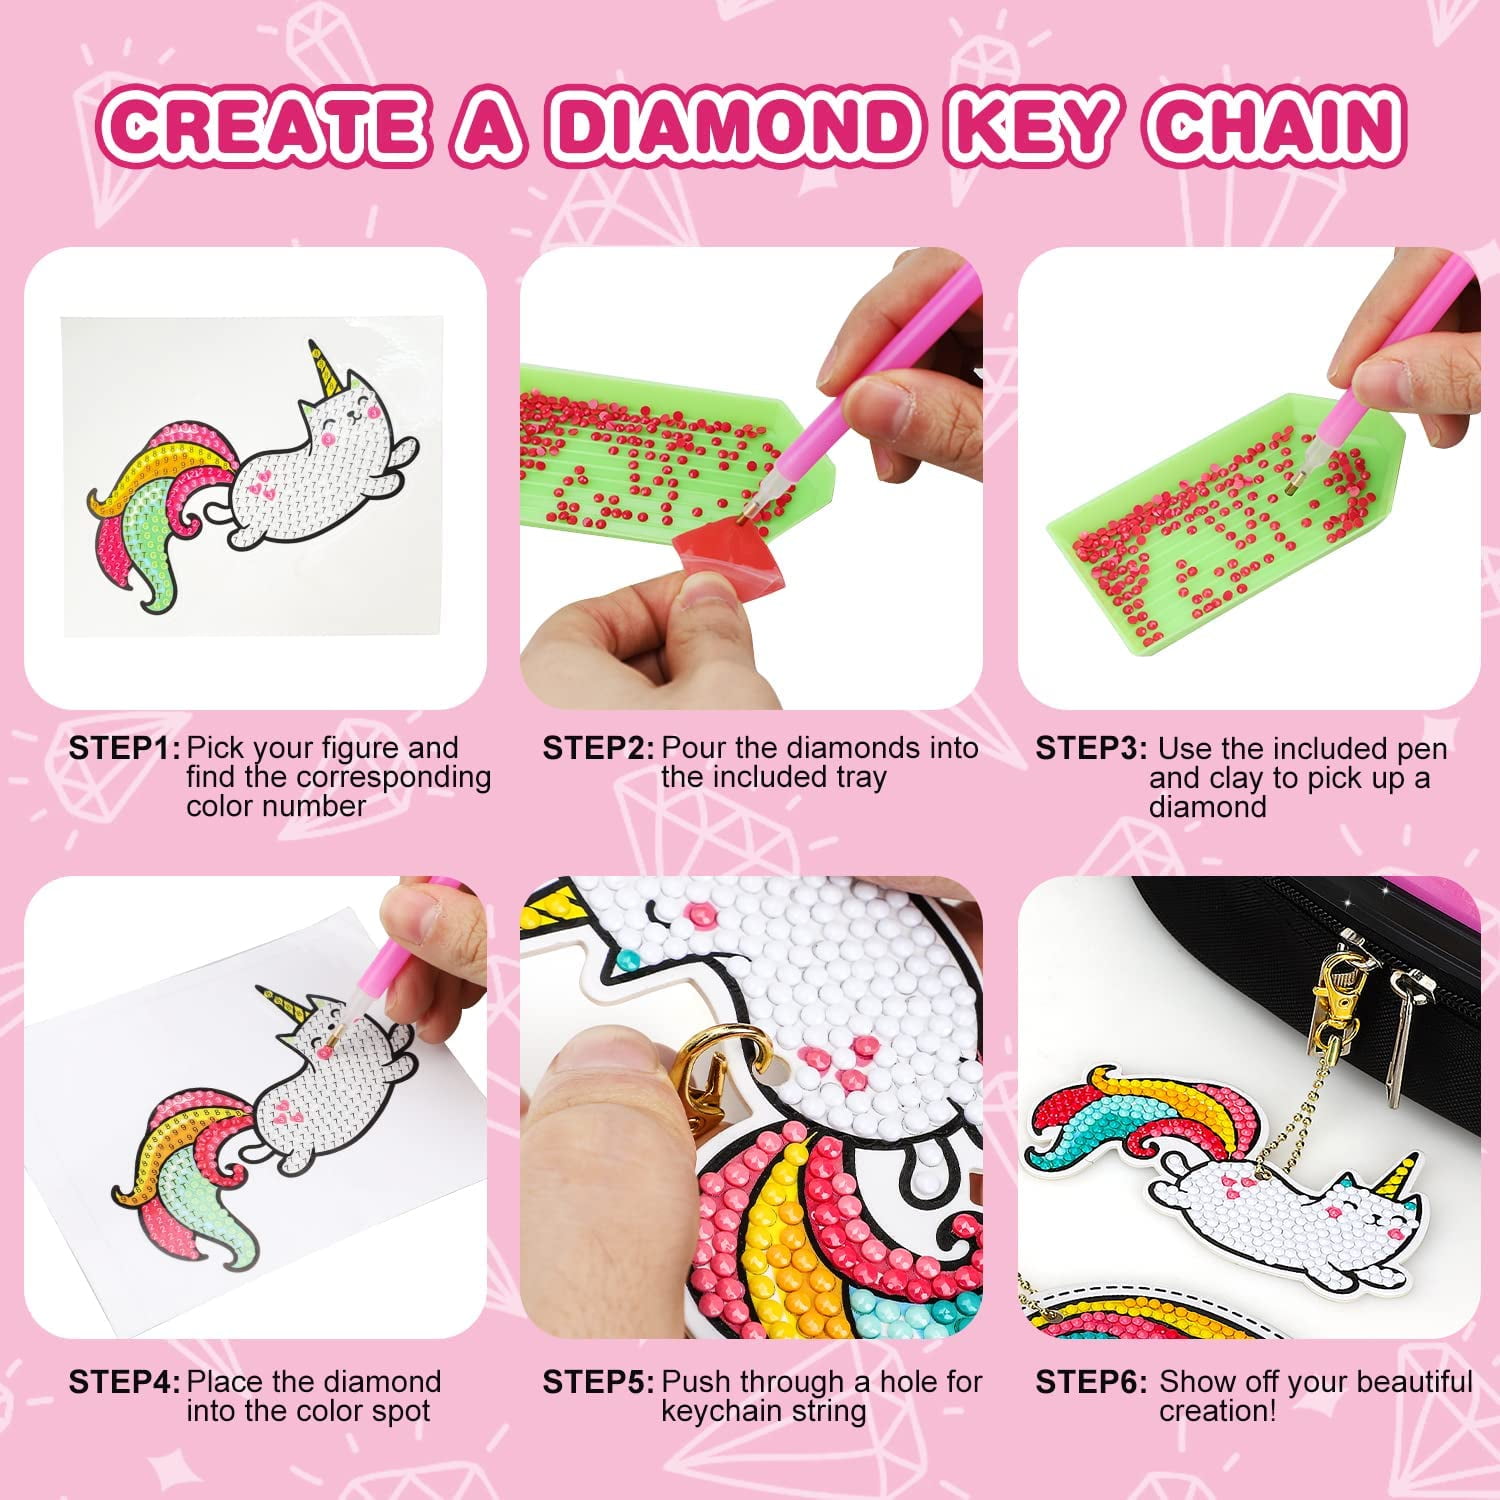 Arts and Crafts for Kids Ages 8-12 - Make Your Own GEM Keychains - 5D  Diamond Painting by Numbers Art Kits for Girls Kids Toddler Ages 3-5 4-6  6-8 Easter Basket Stuffers